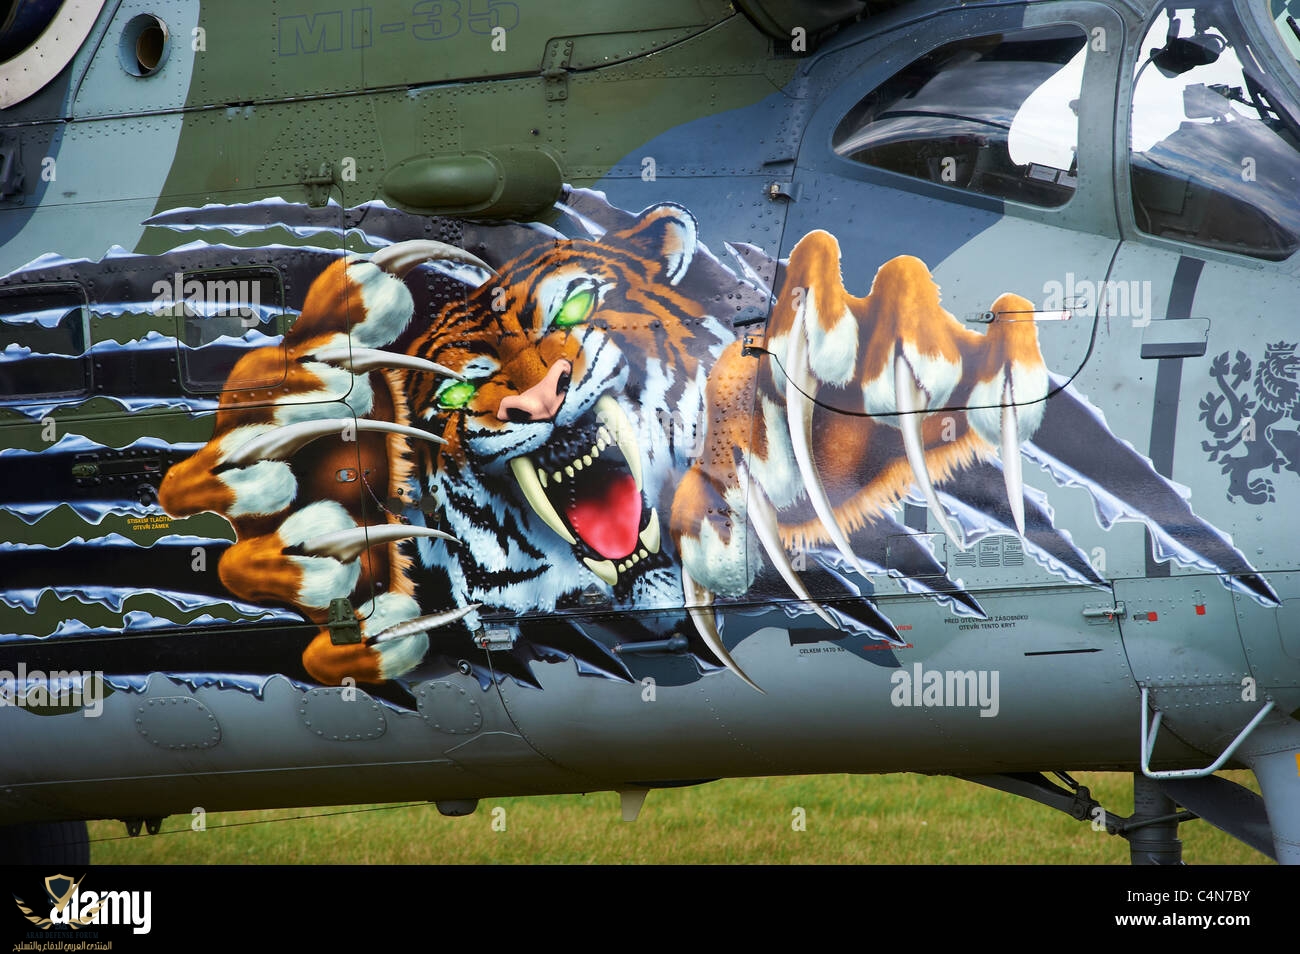 helicopter-mi-24-mi-35-hind-tiger-squadron-memorial-air-show-2011-C4N7BY.jpg